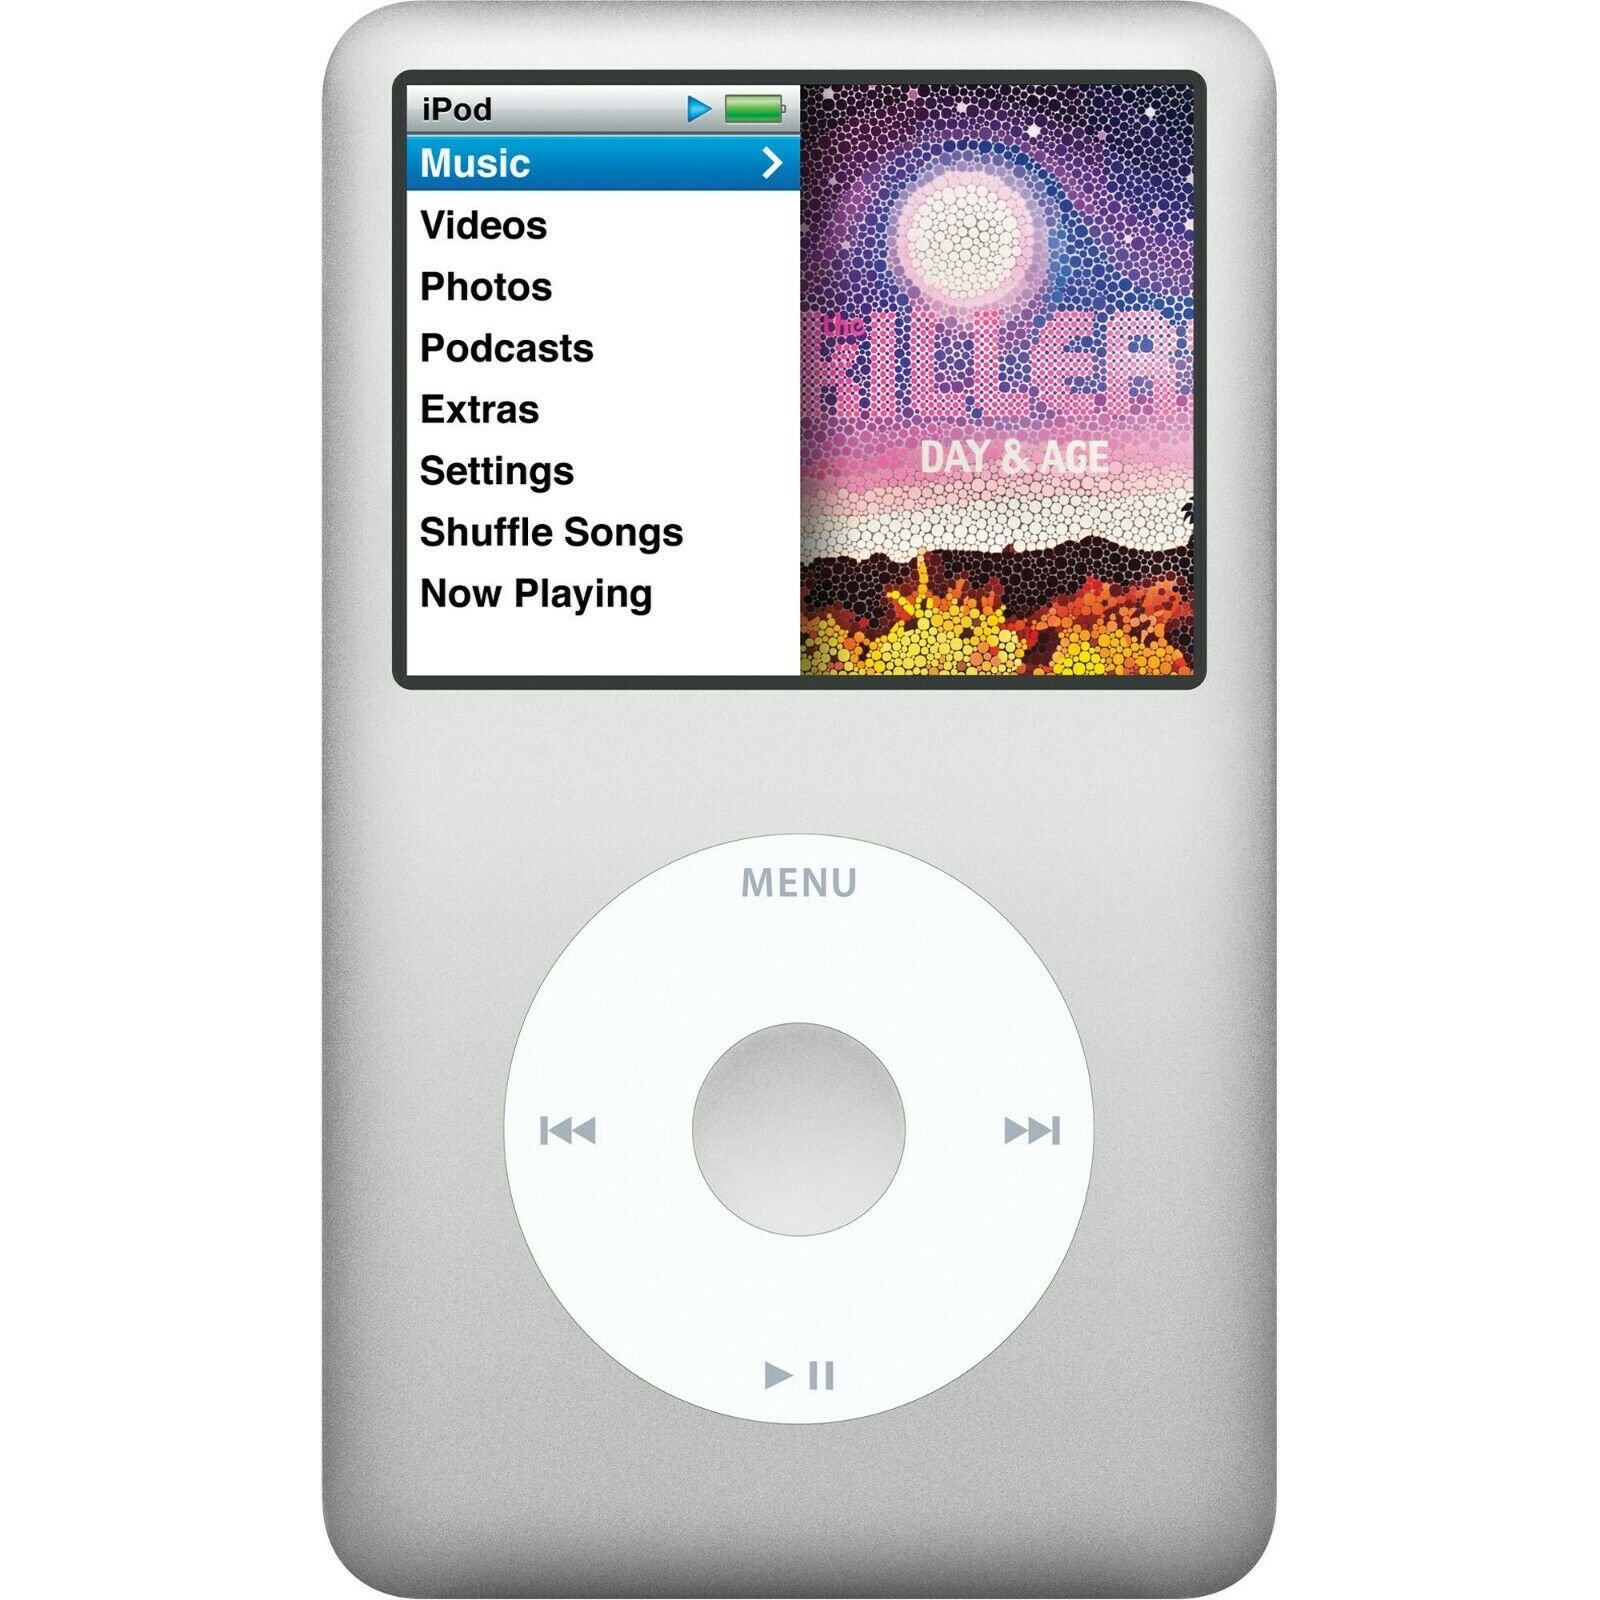 IPod To Phone Music Transfer: Sending Music From IPod To Phone Via Bluetooth